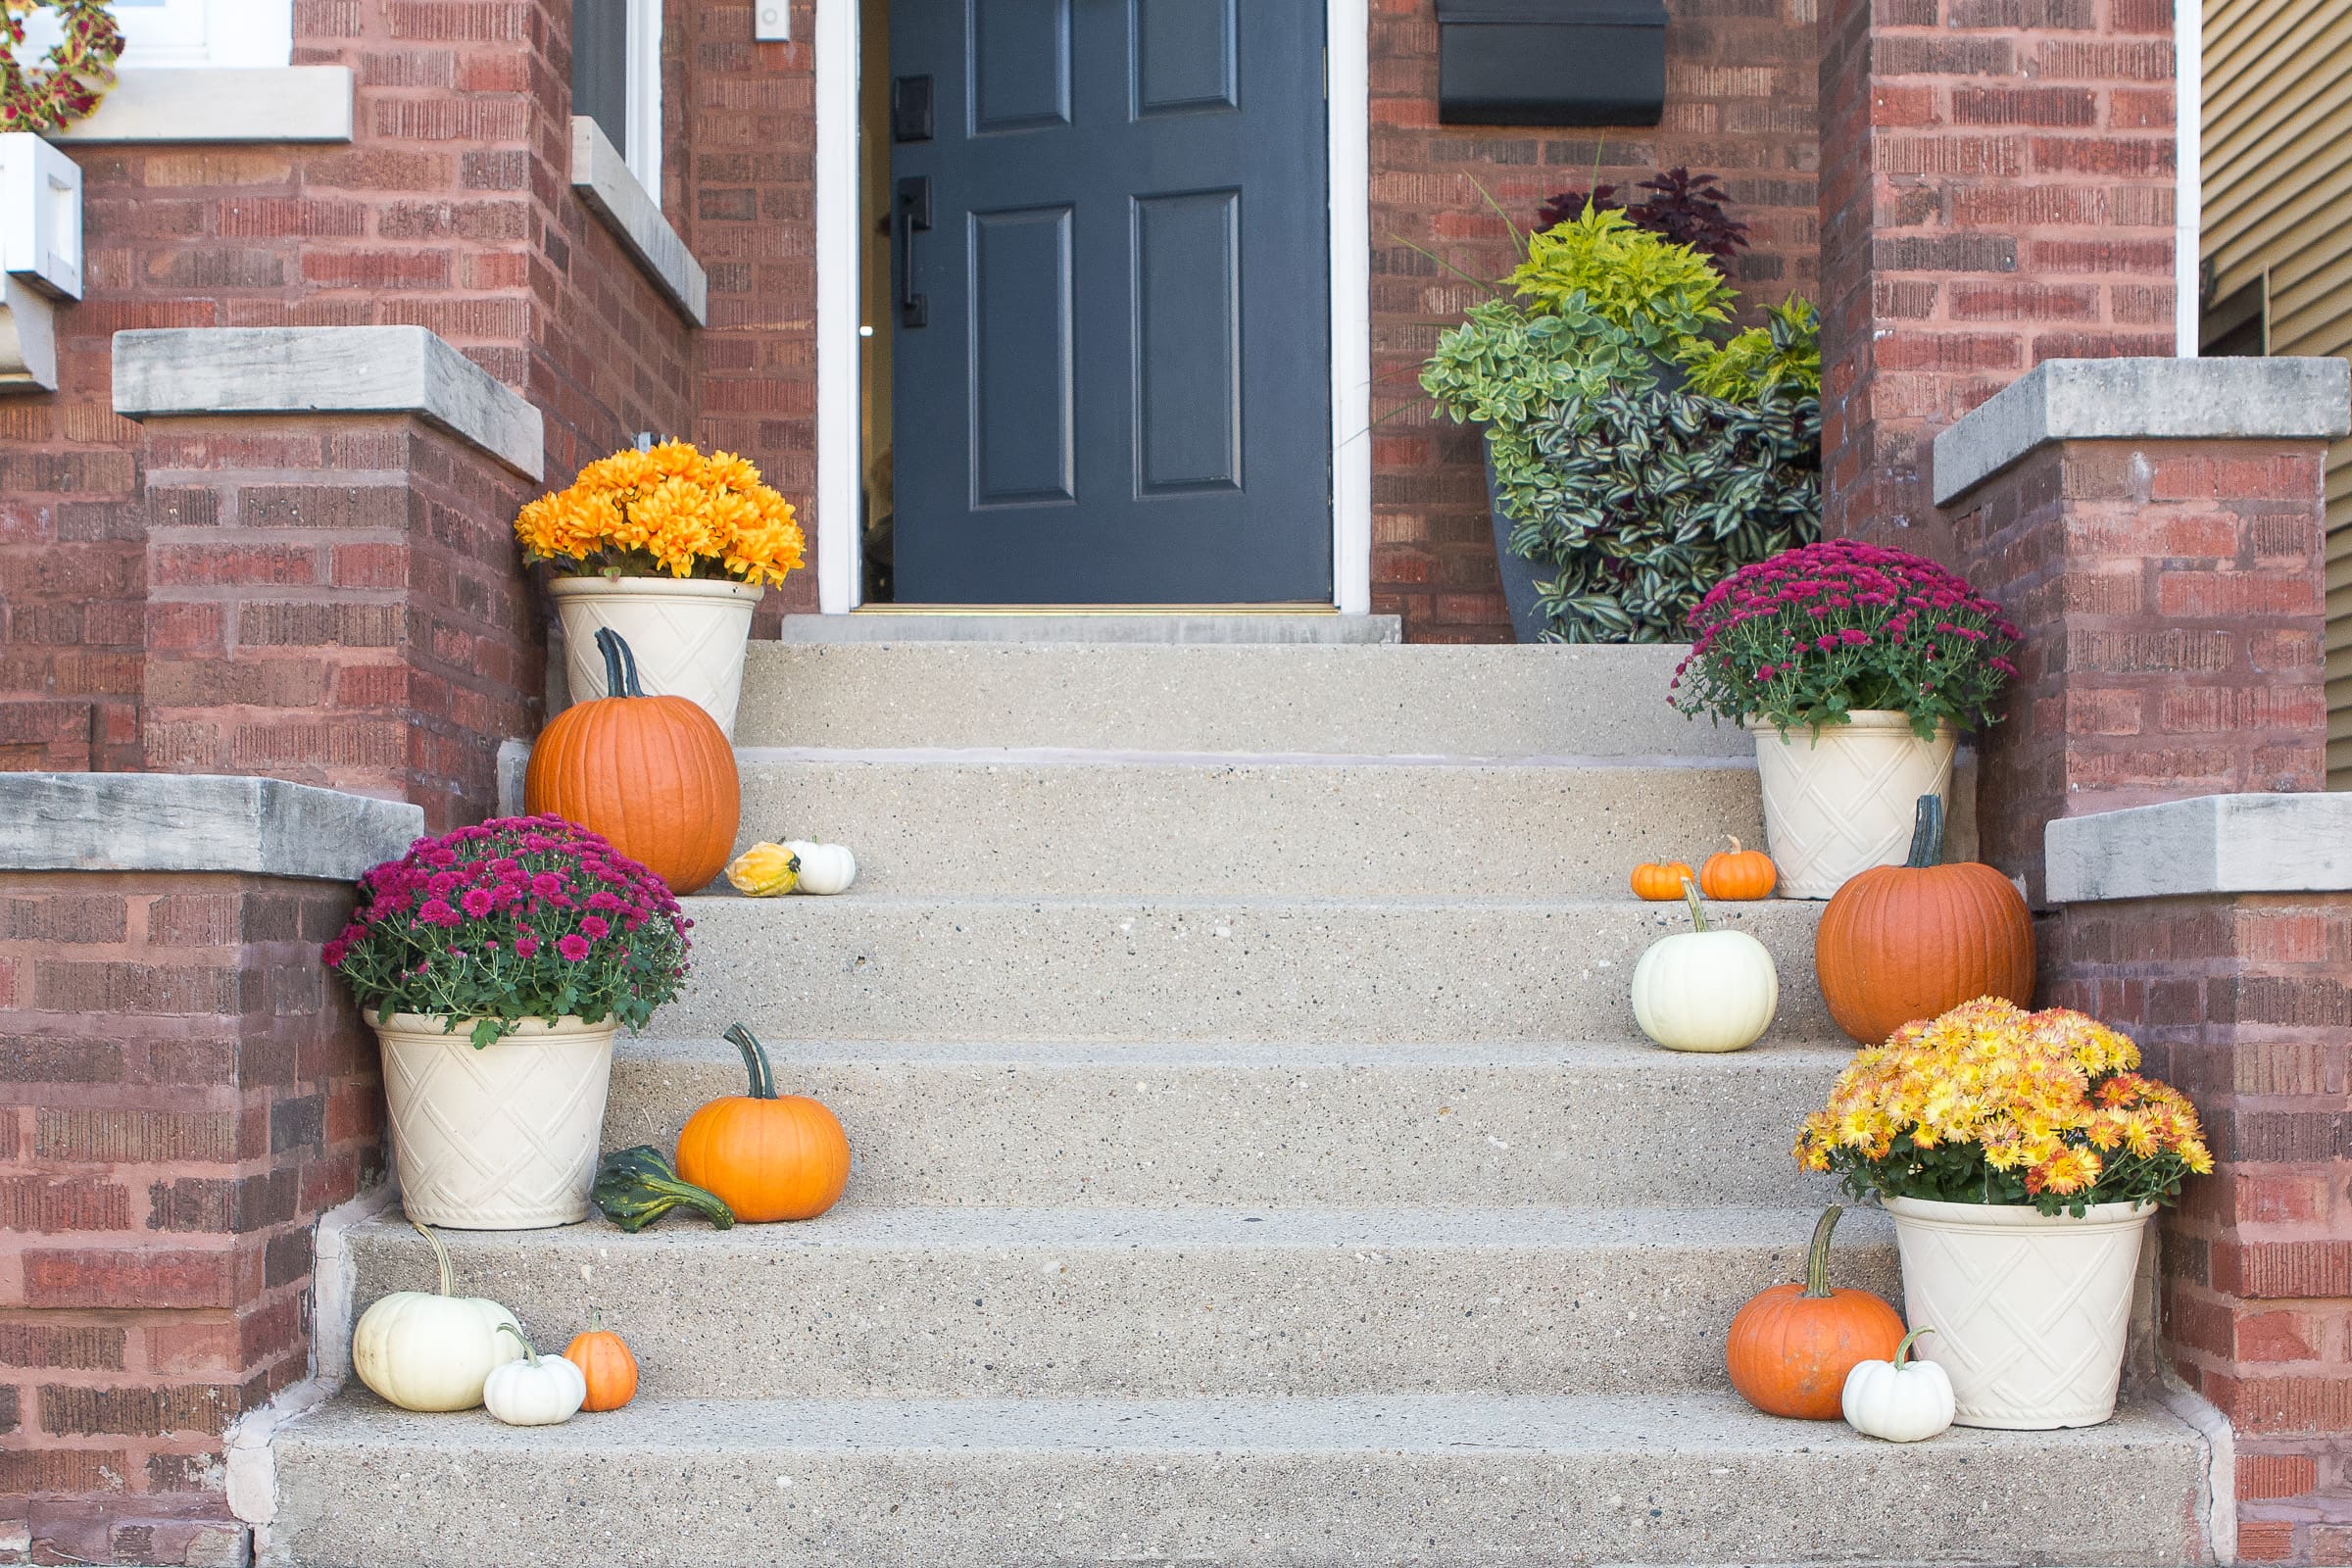 Our fall front porch with faux mums